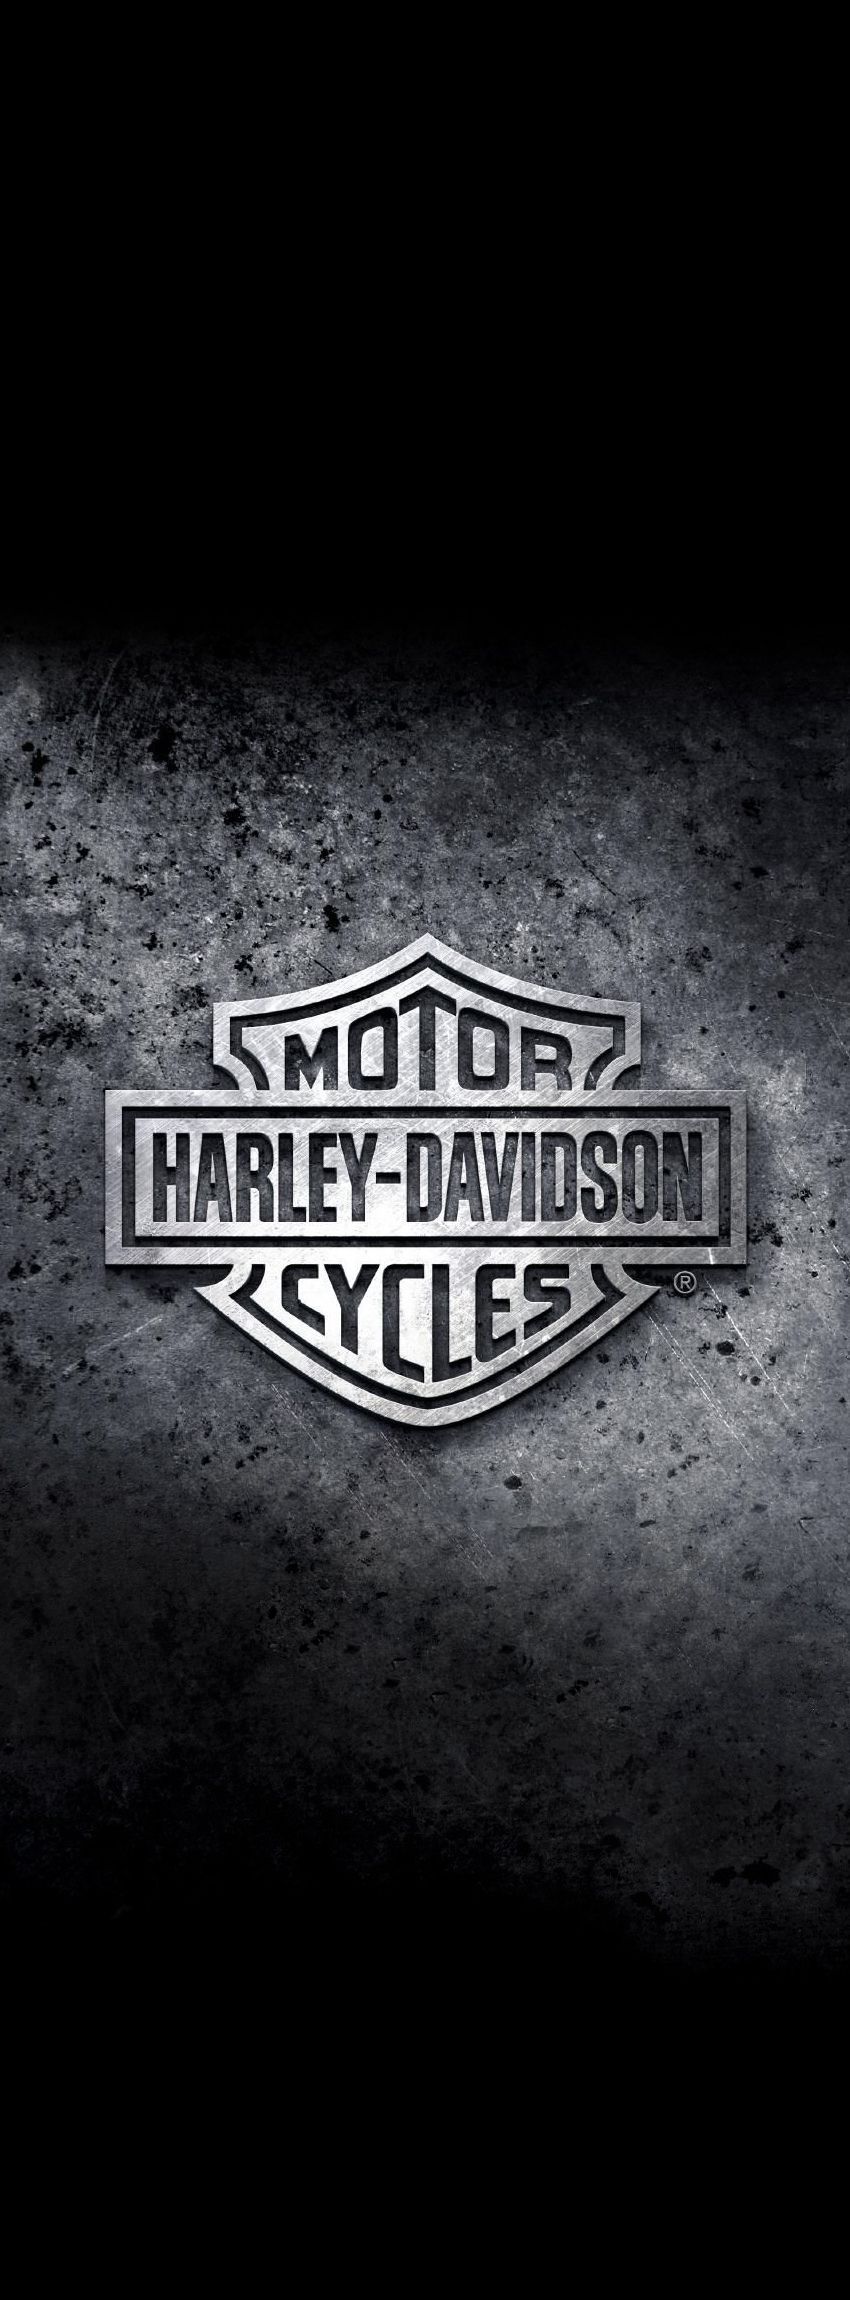 Harley Davidson Photos Download The BEST Free Harley Davidson Stock Photos   HD Images